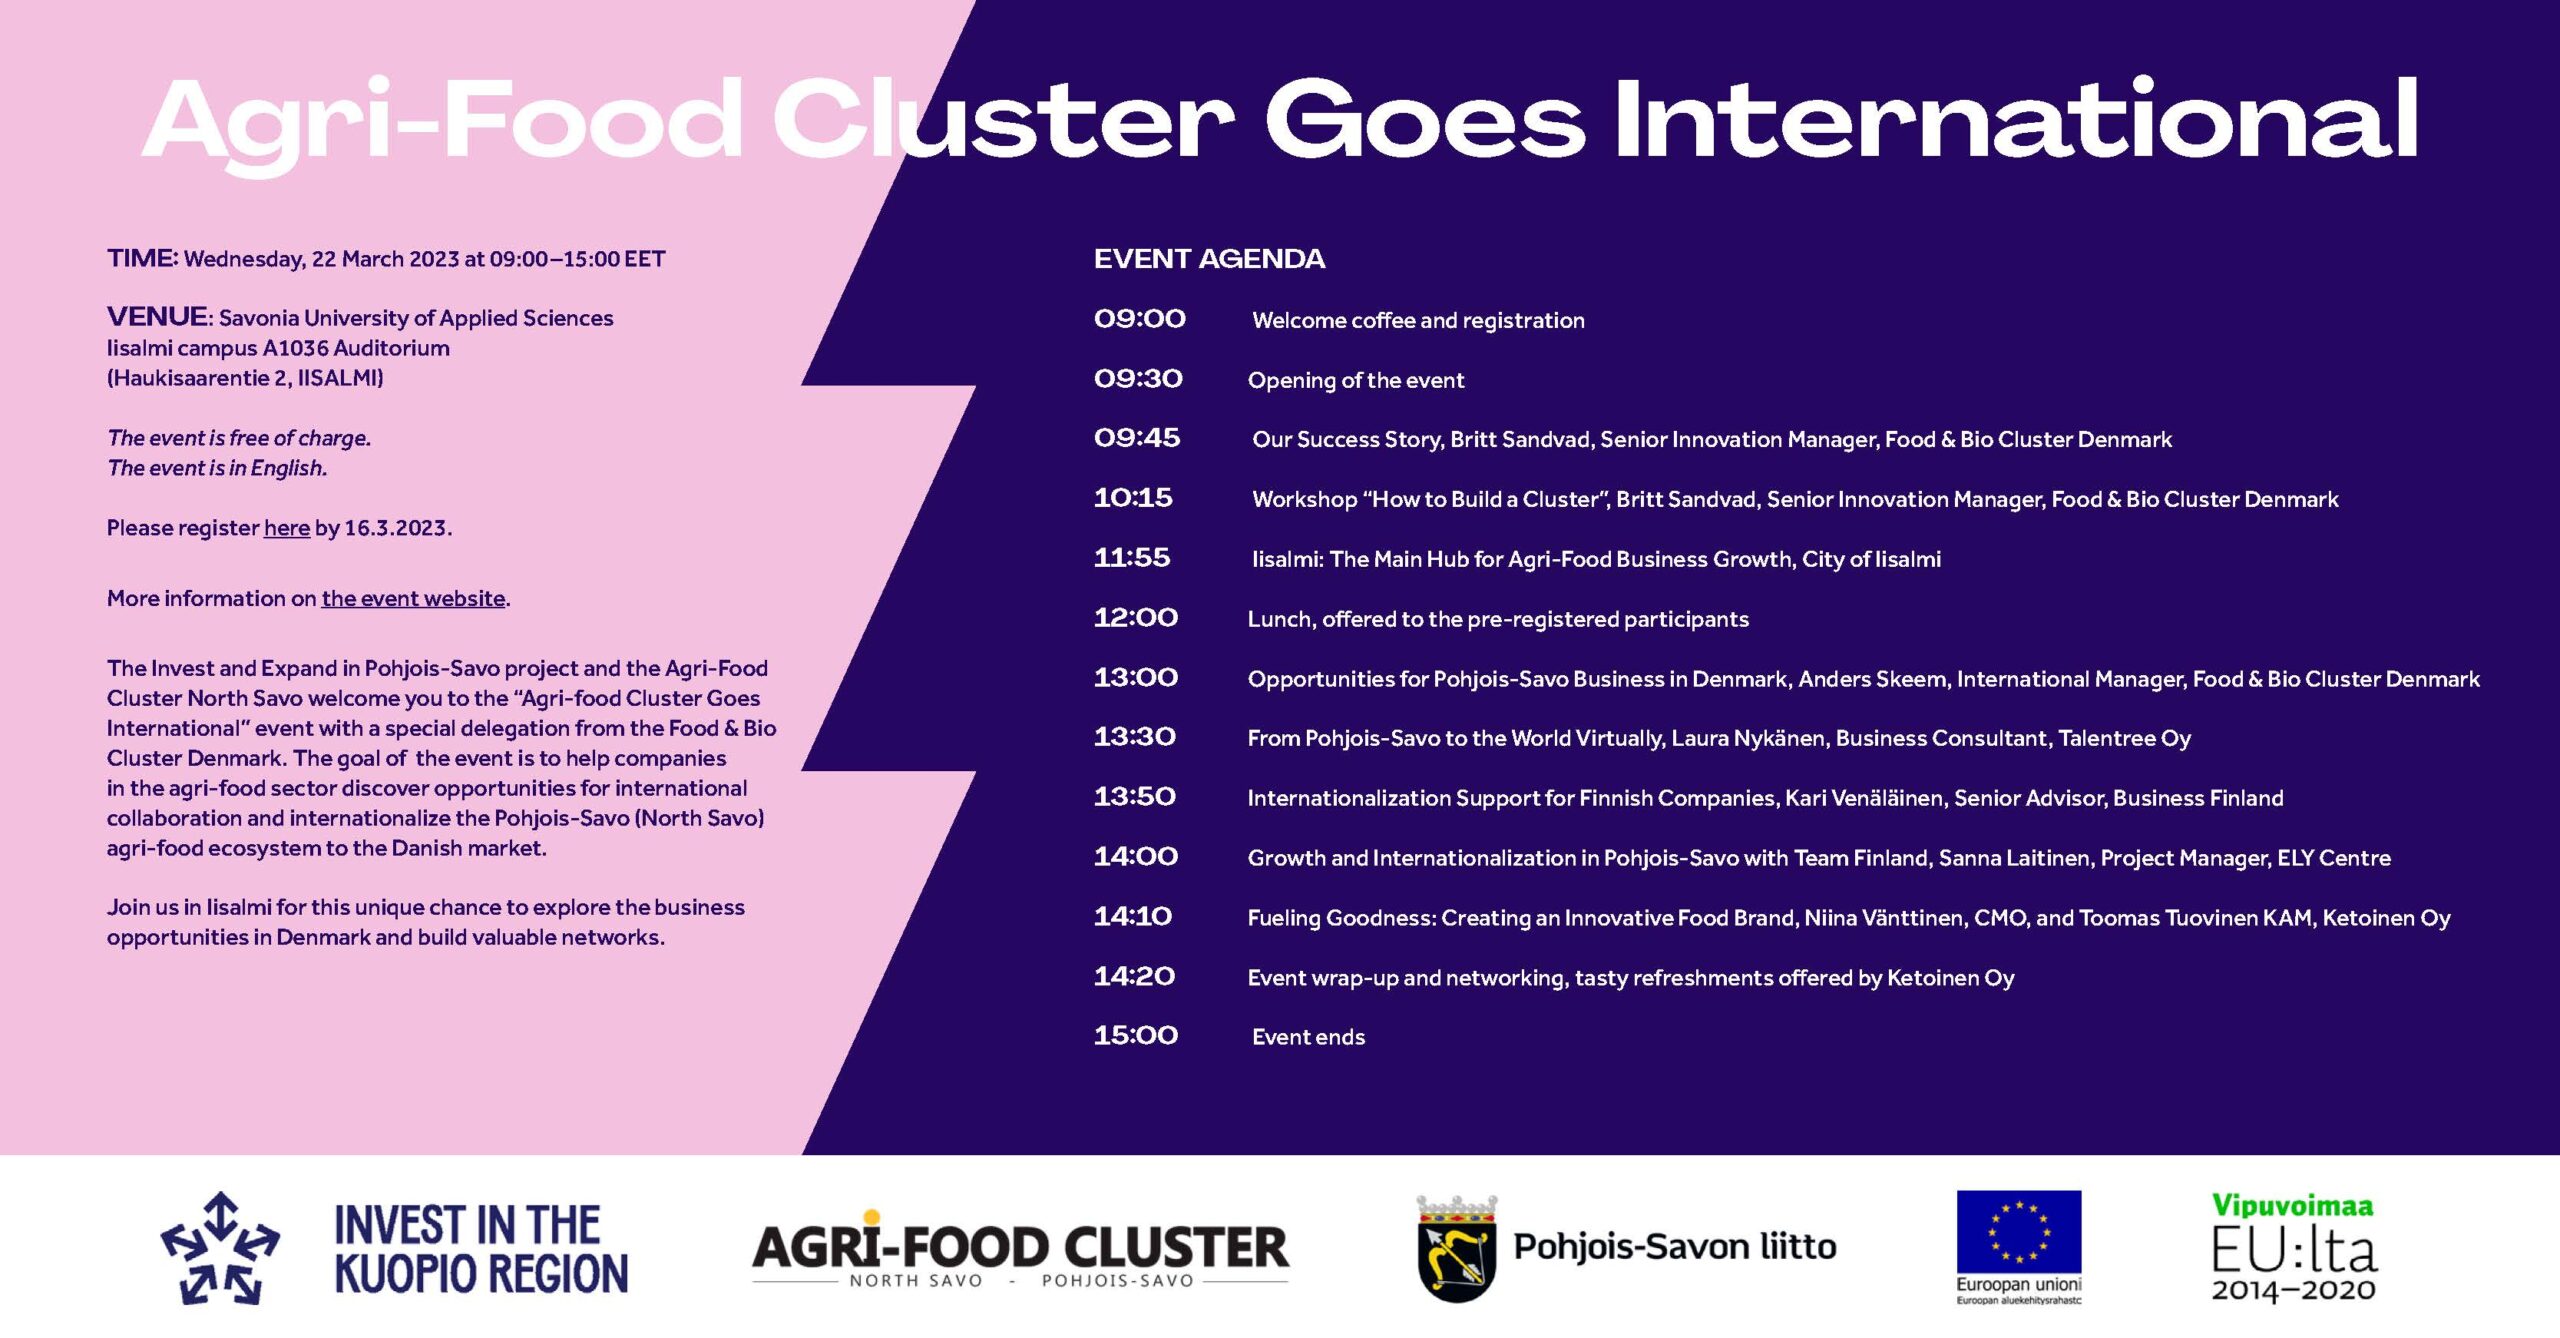 Agri-Food Cluster Goes International event schedule